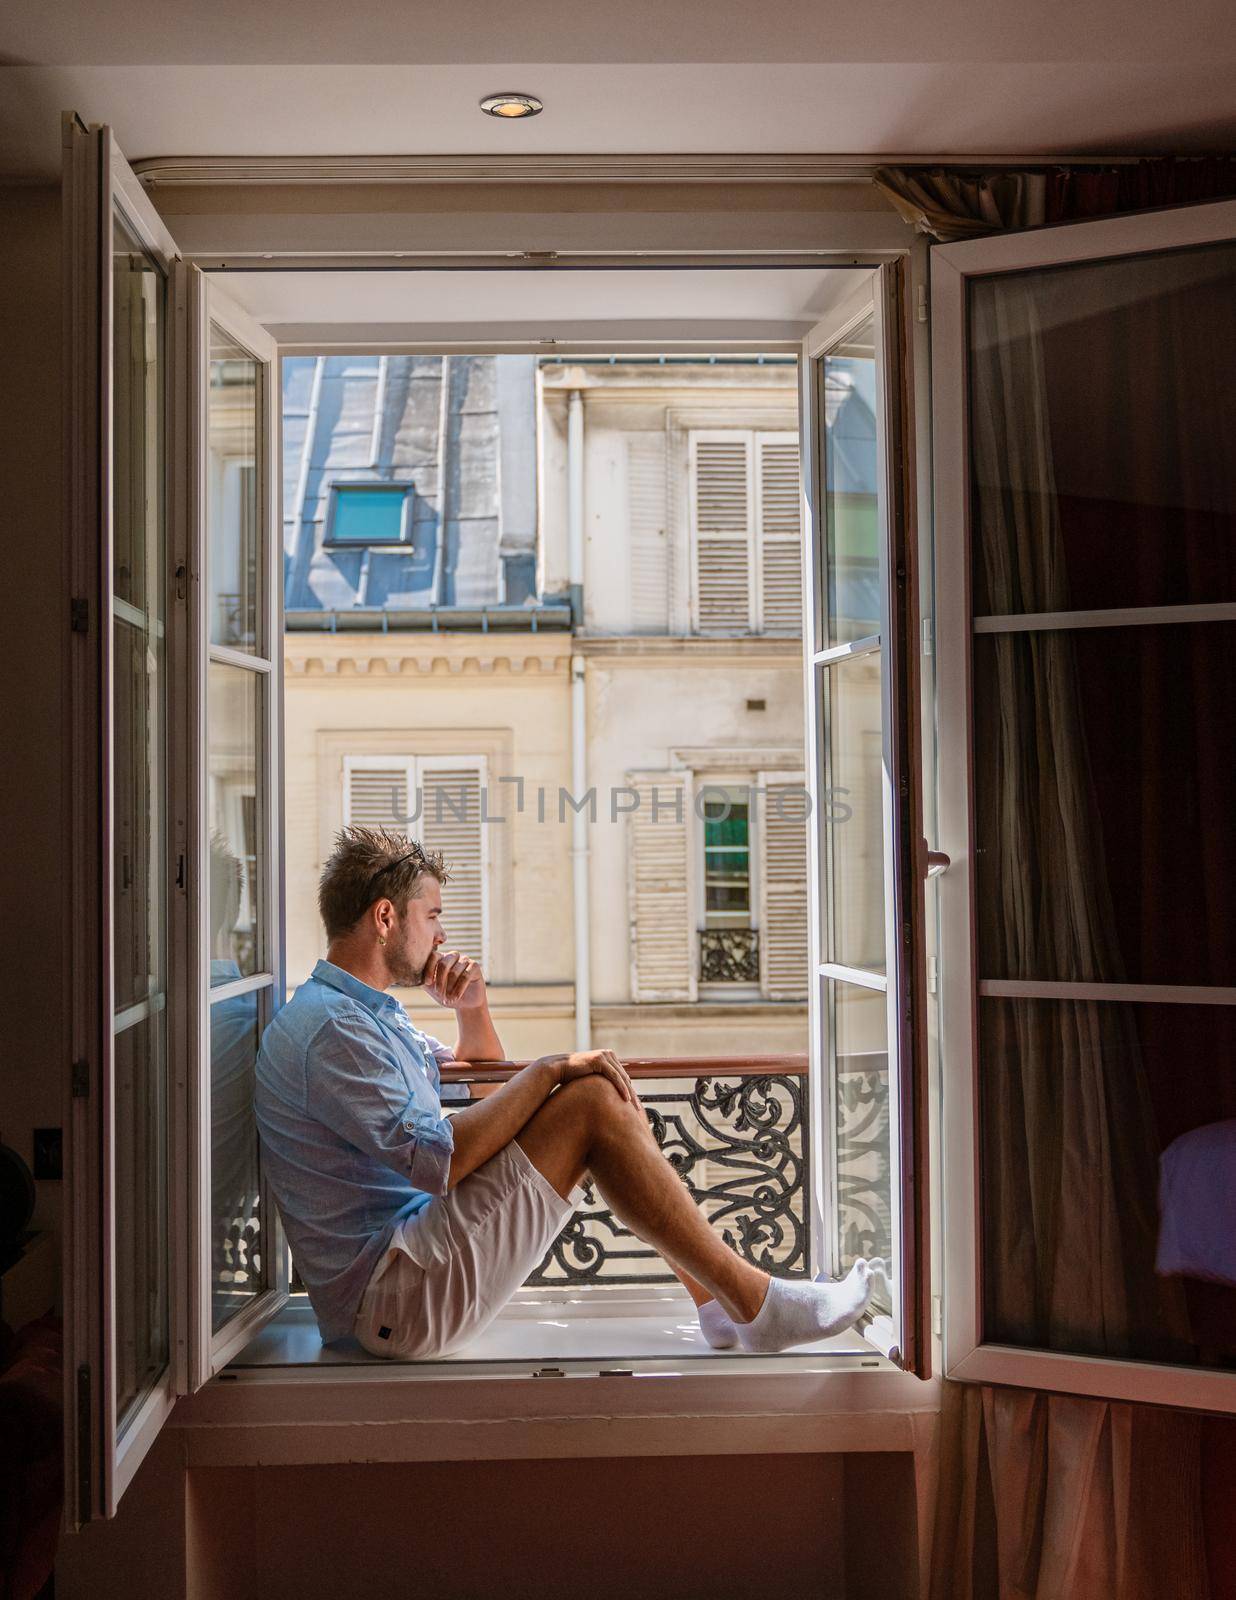 young man sitting in a window looking out over the city Paris. Men enjoy sun in window of hotel room by fokkebok